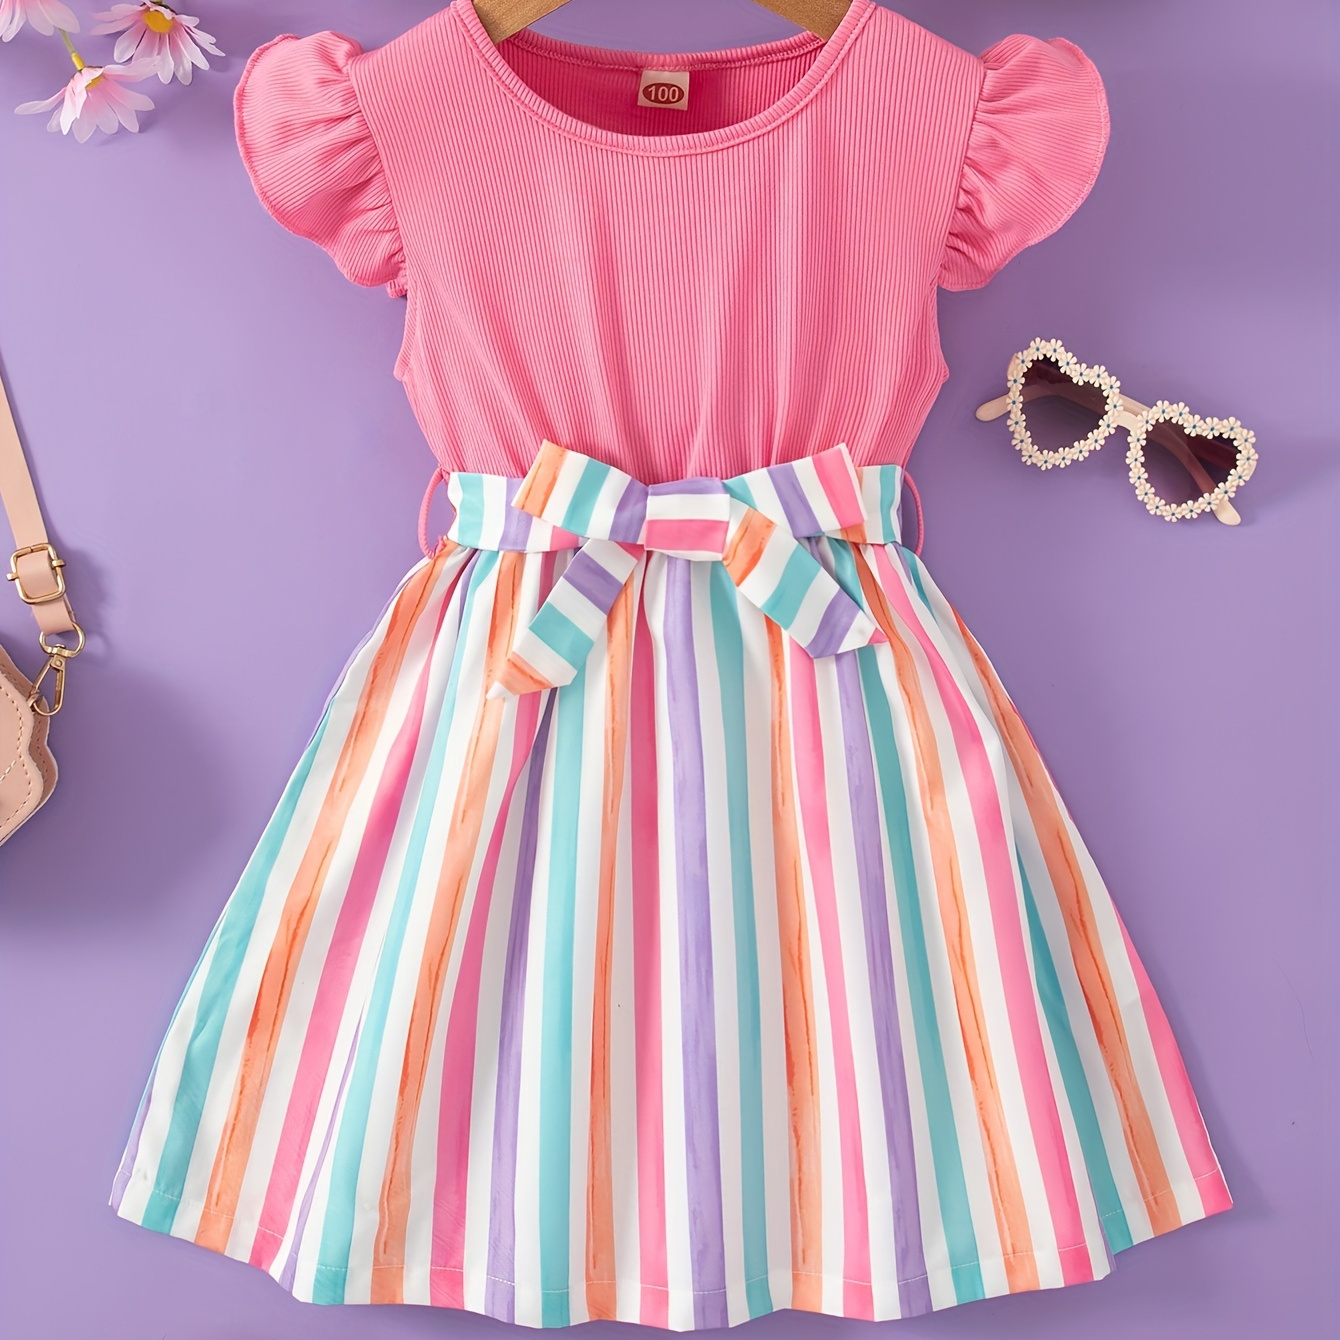 

Girls Sweet Splicing Stripped Short Sleeve Belted Dress Cute Dresses For Summer Holiday Outdoor Party